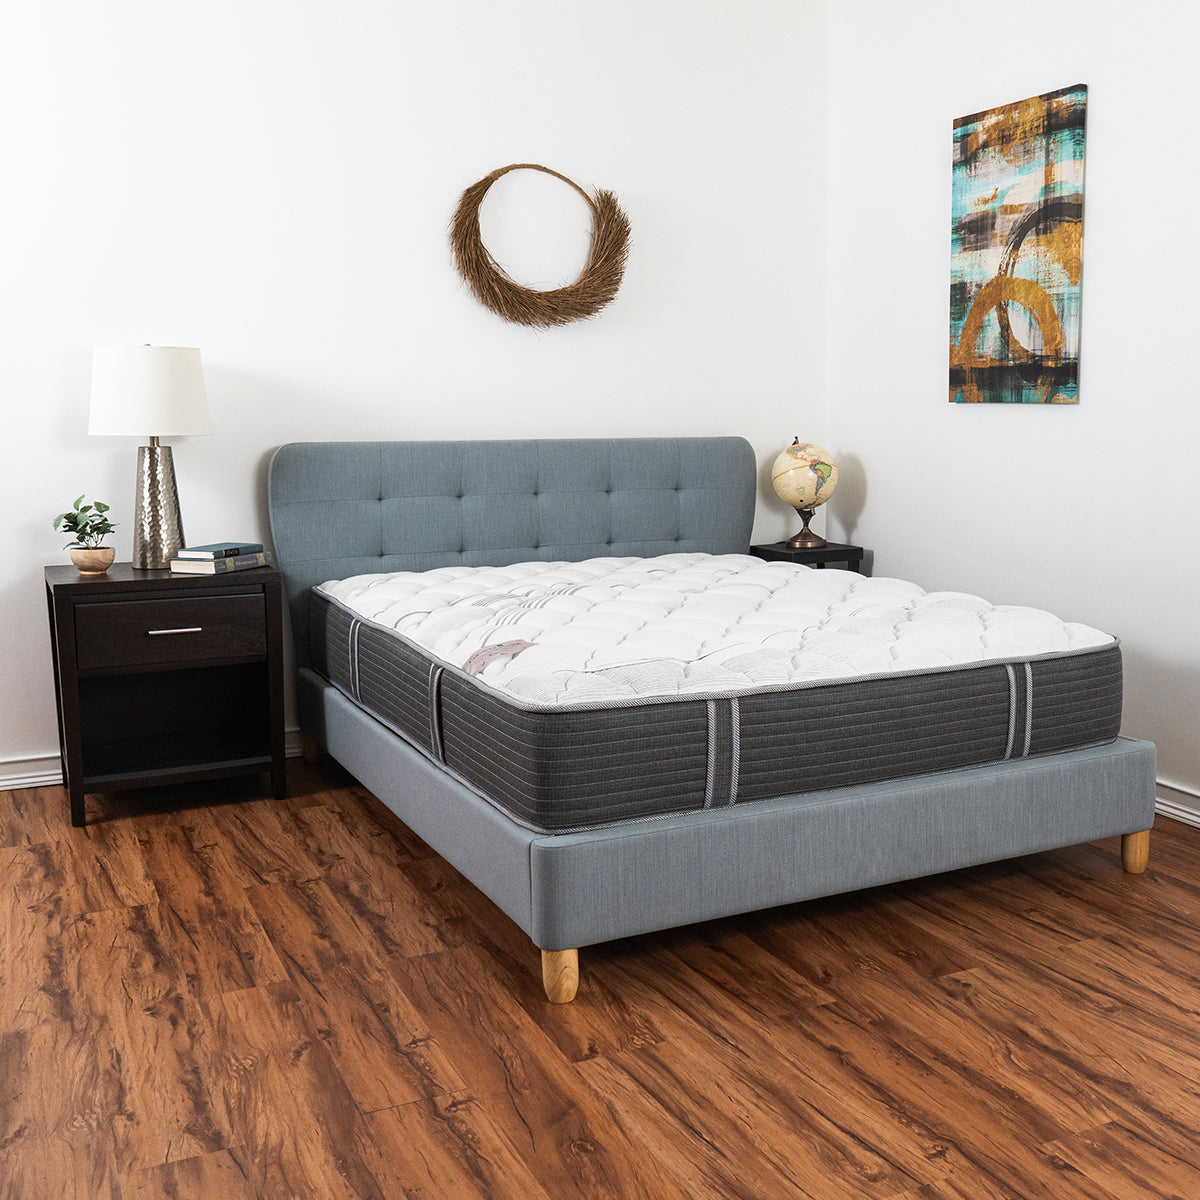 Cheswick Manor Kingston Plush Mattress In Bedroom On Platform Bed Front View